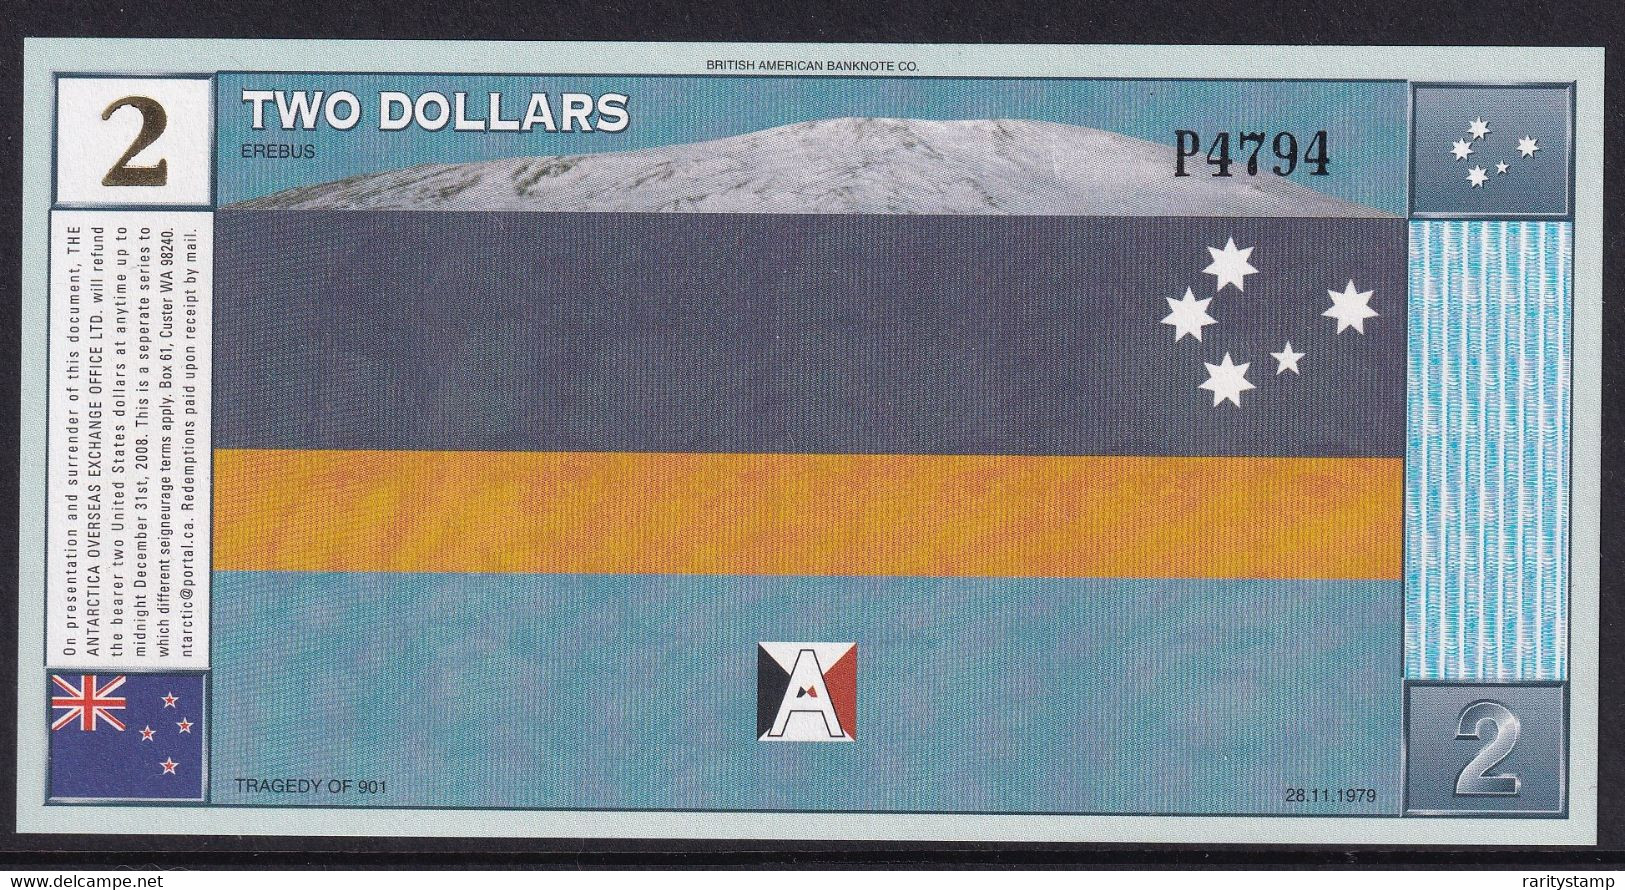 ANTARCTICA  $2  11.28.1999 TRAGEDY OF 901 NEW UNC FDS NEW ZEALAND TERRITORY - Other - Oceania